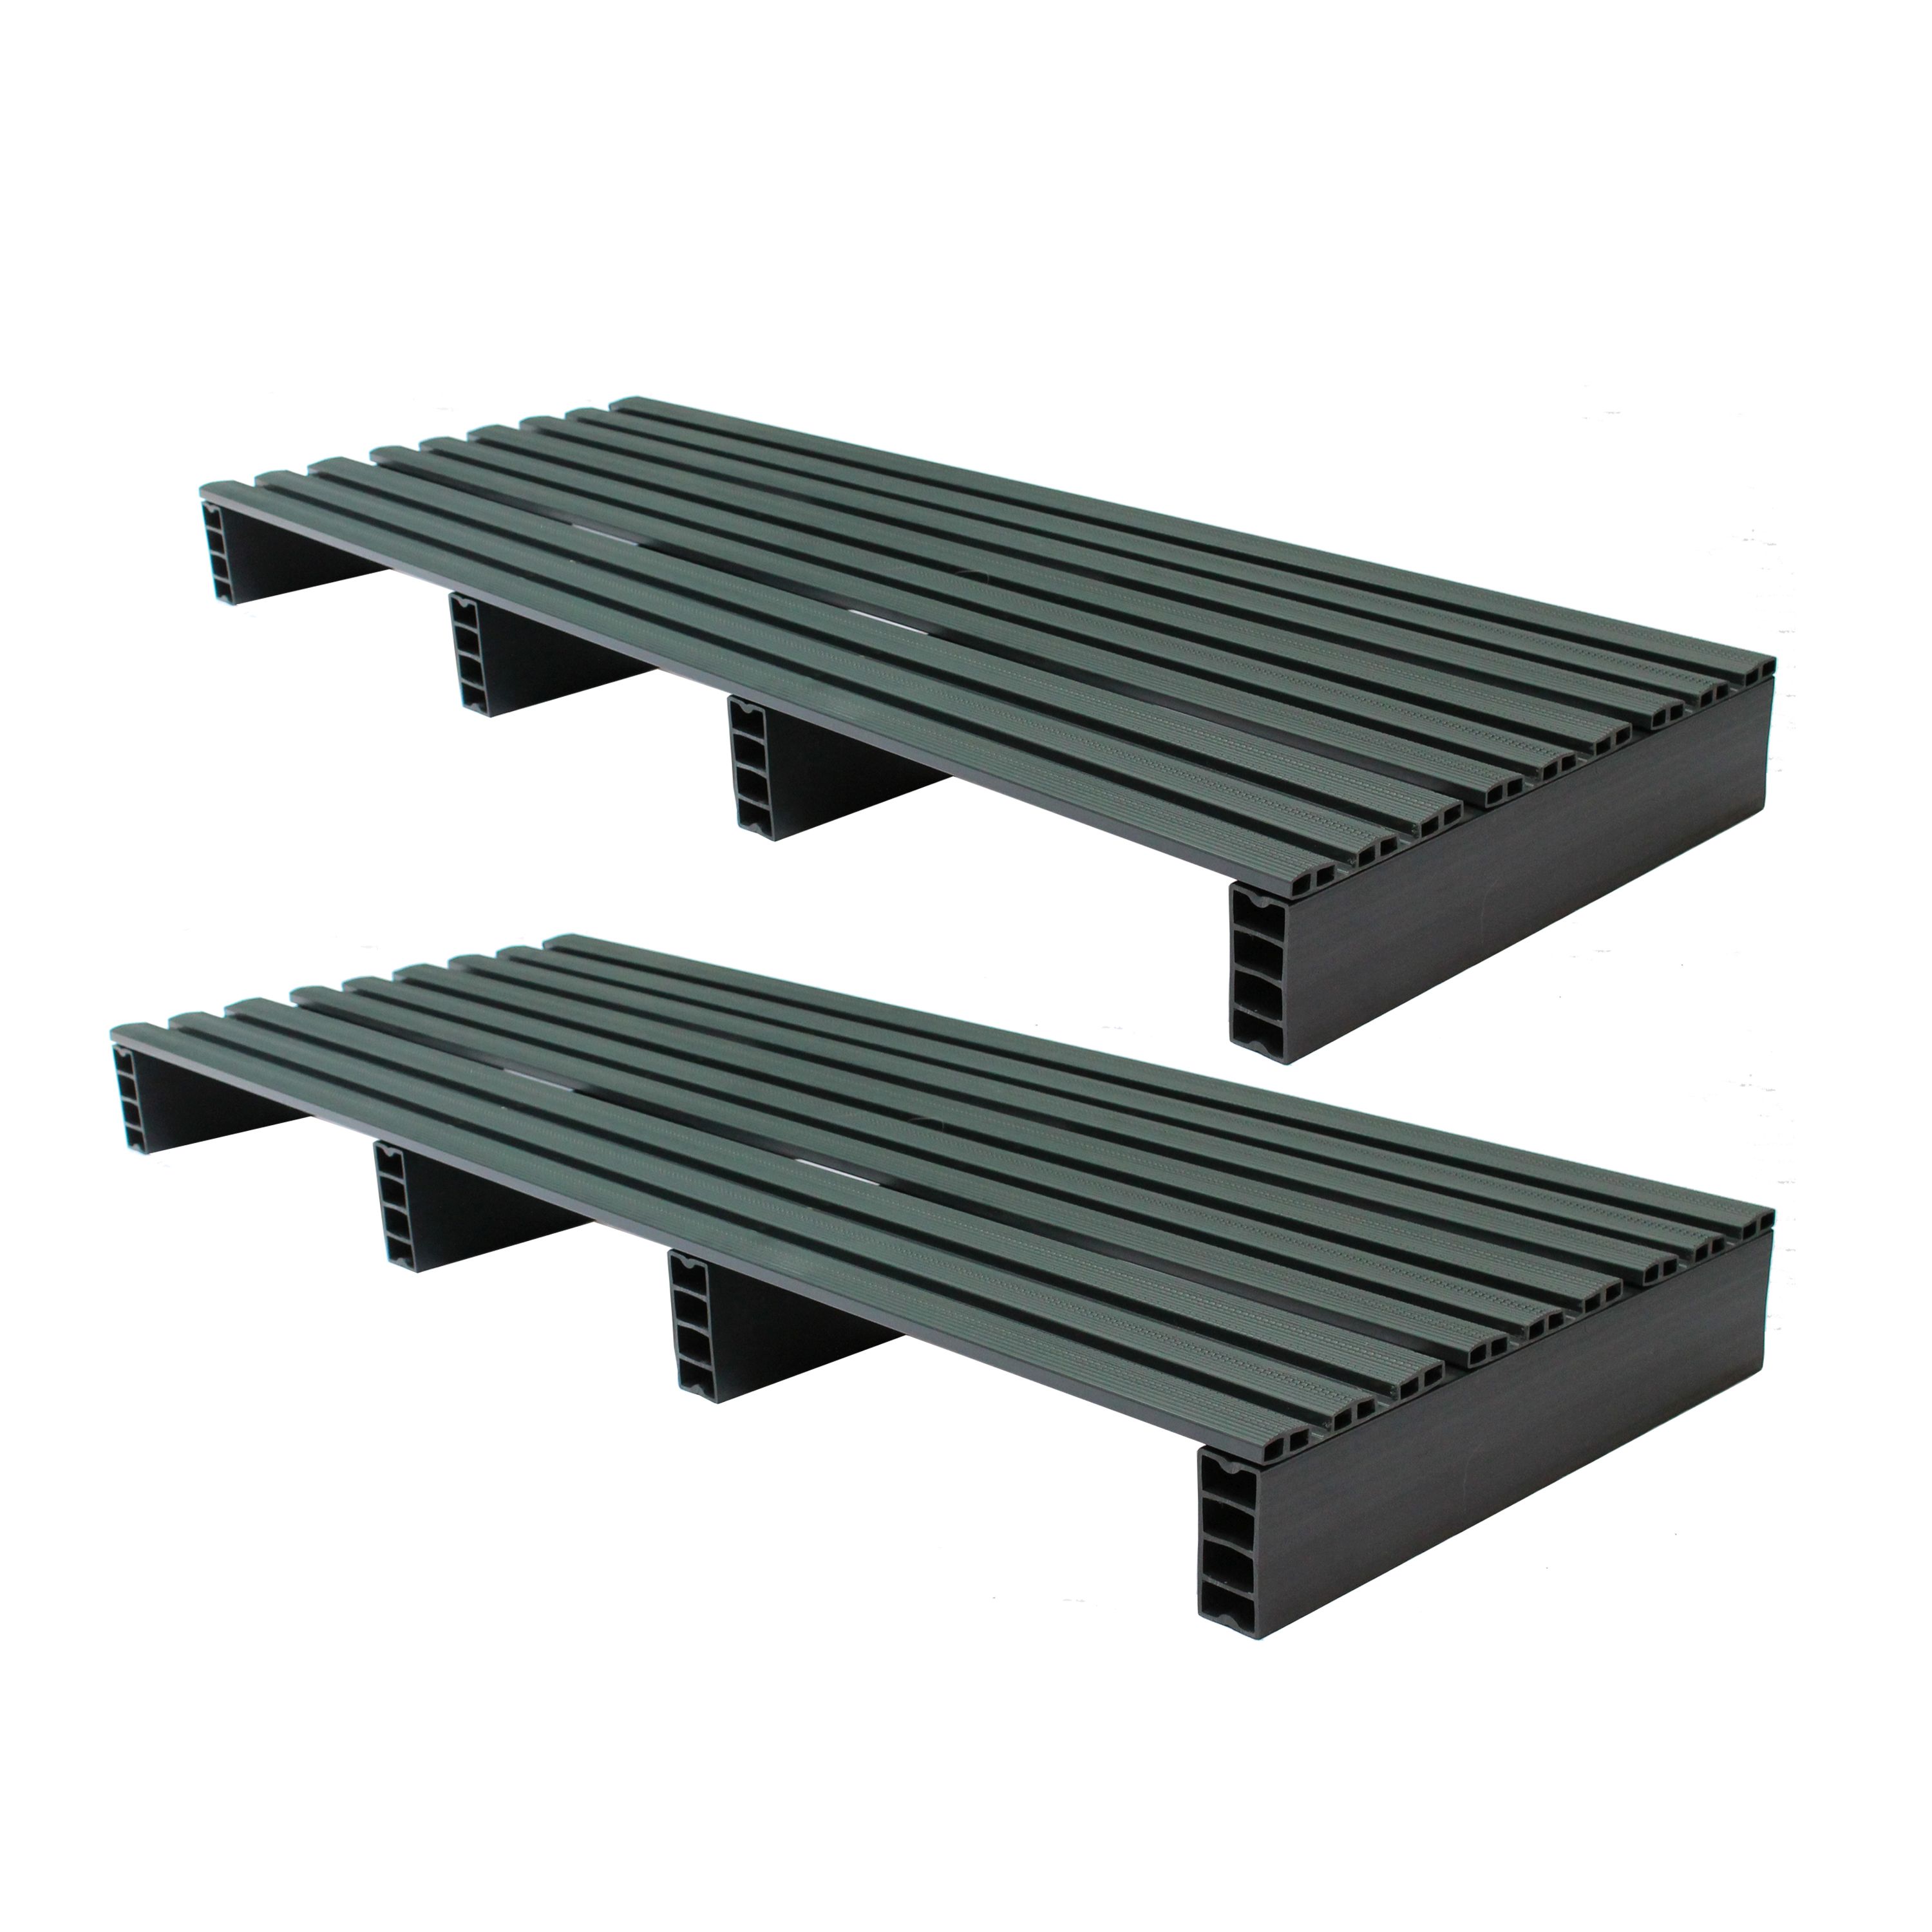 Picture of Jifram Extrusions 5000554 18 x 48 in. Basement Storage Pad - Pack of 2